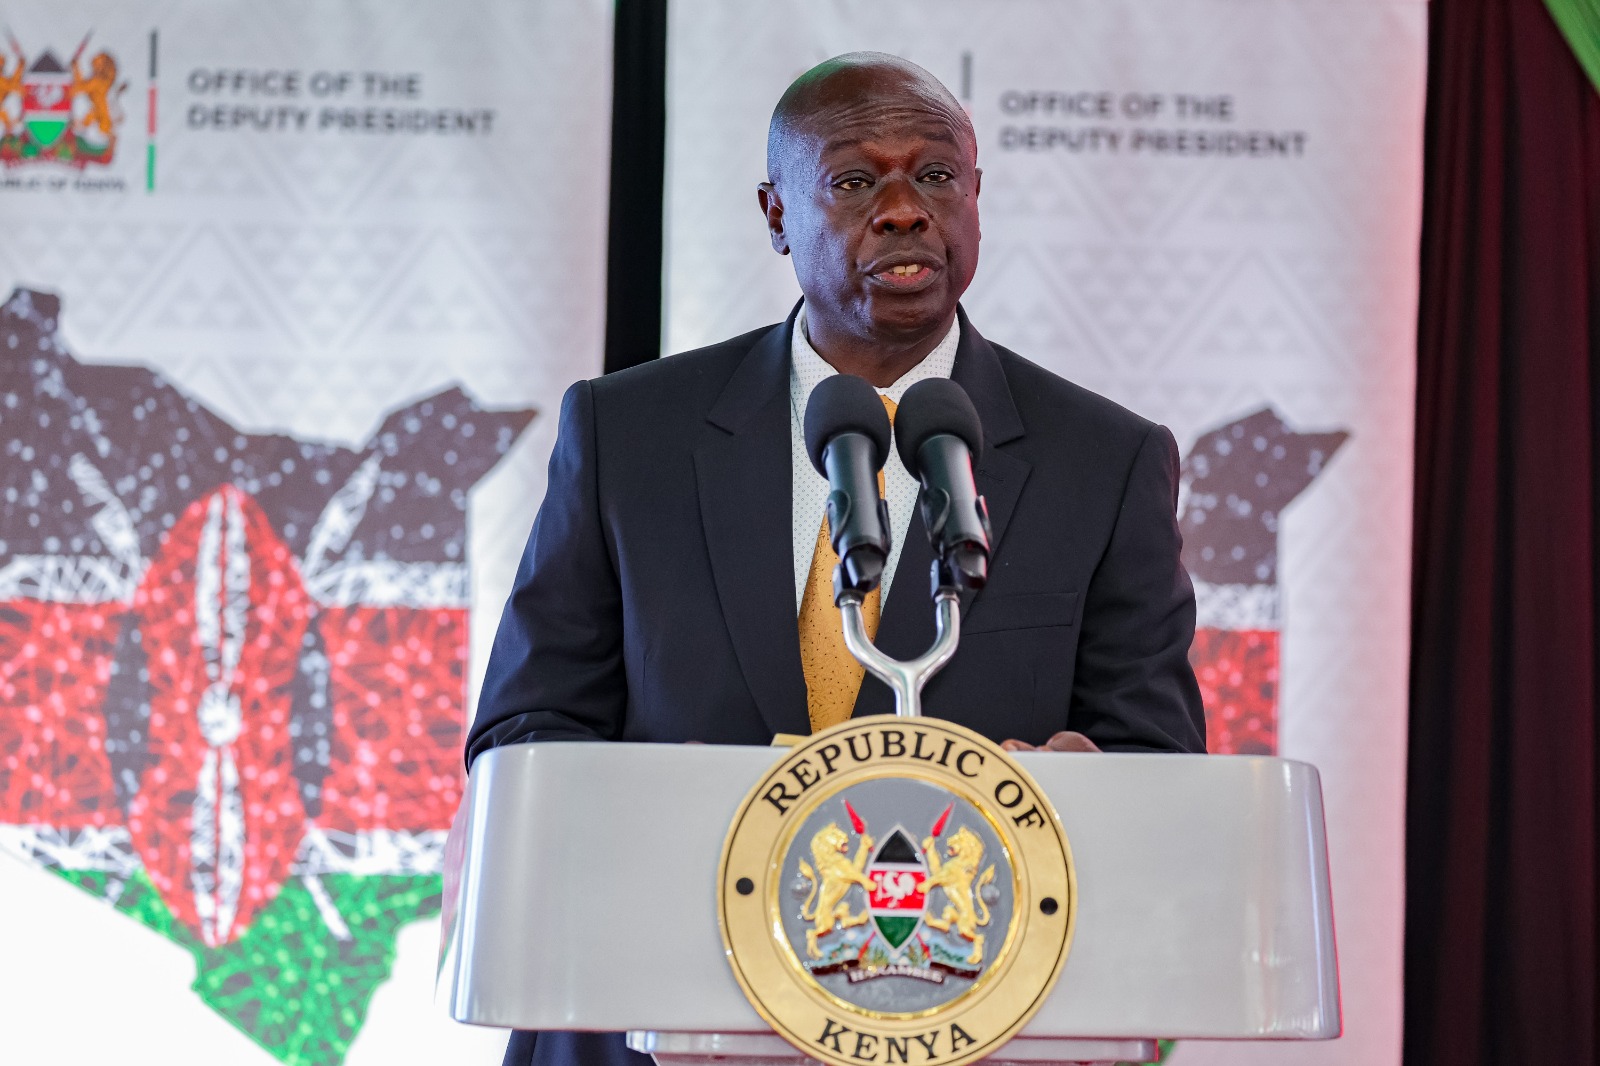 State pledges timely payment of all funds owed to counties in race against crisis